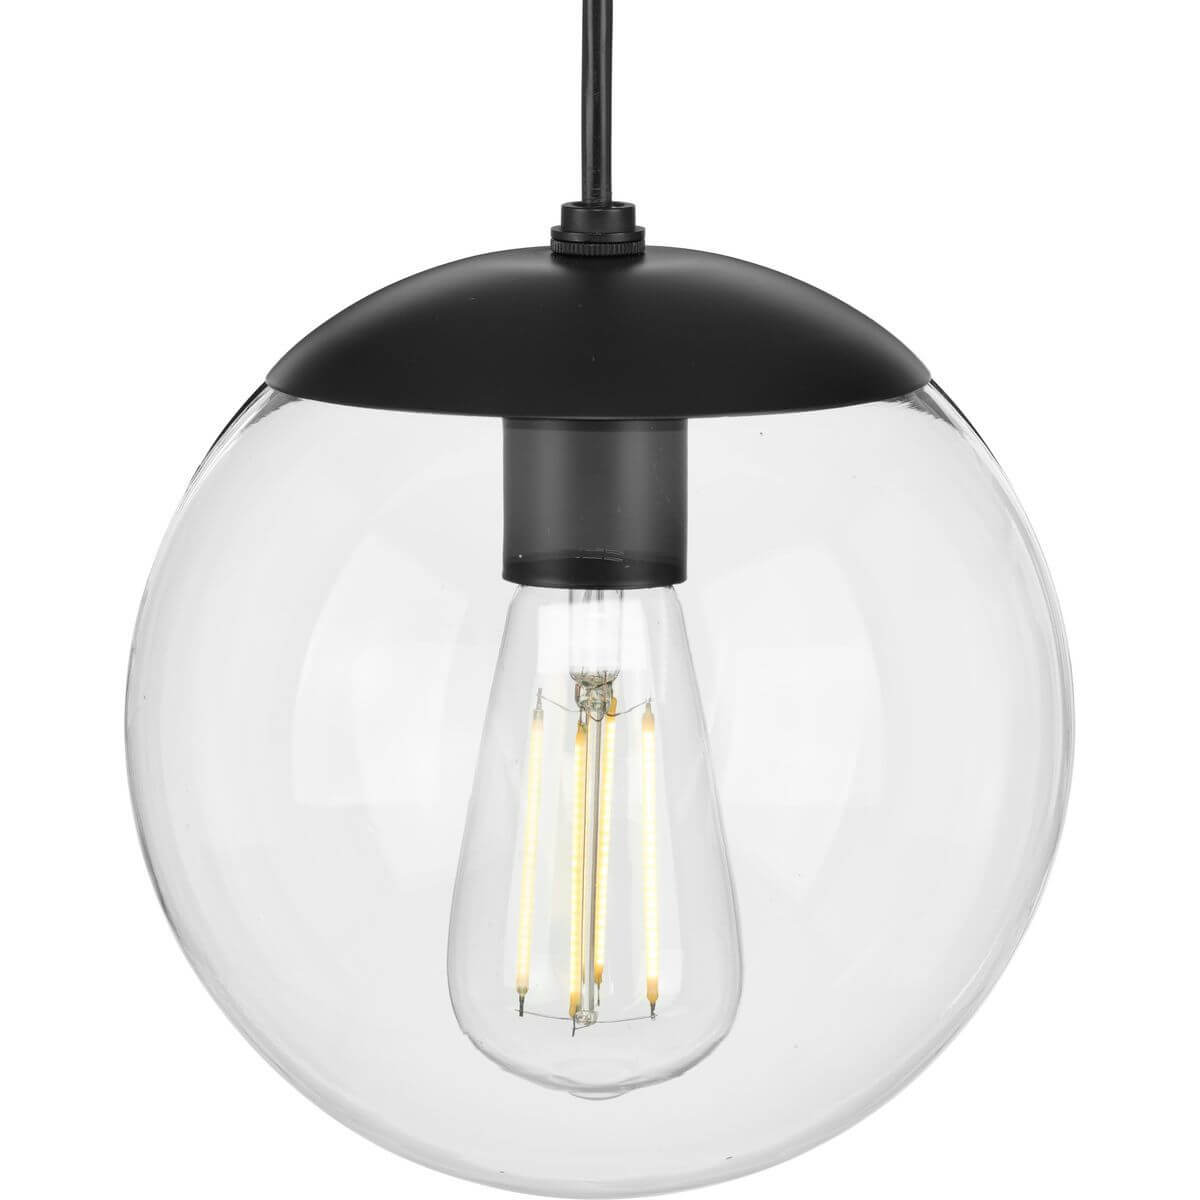 Progress Lighting Atwell 1 Light 8 inch Pendant in Matte Black with Clear Glass P500309-031